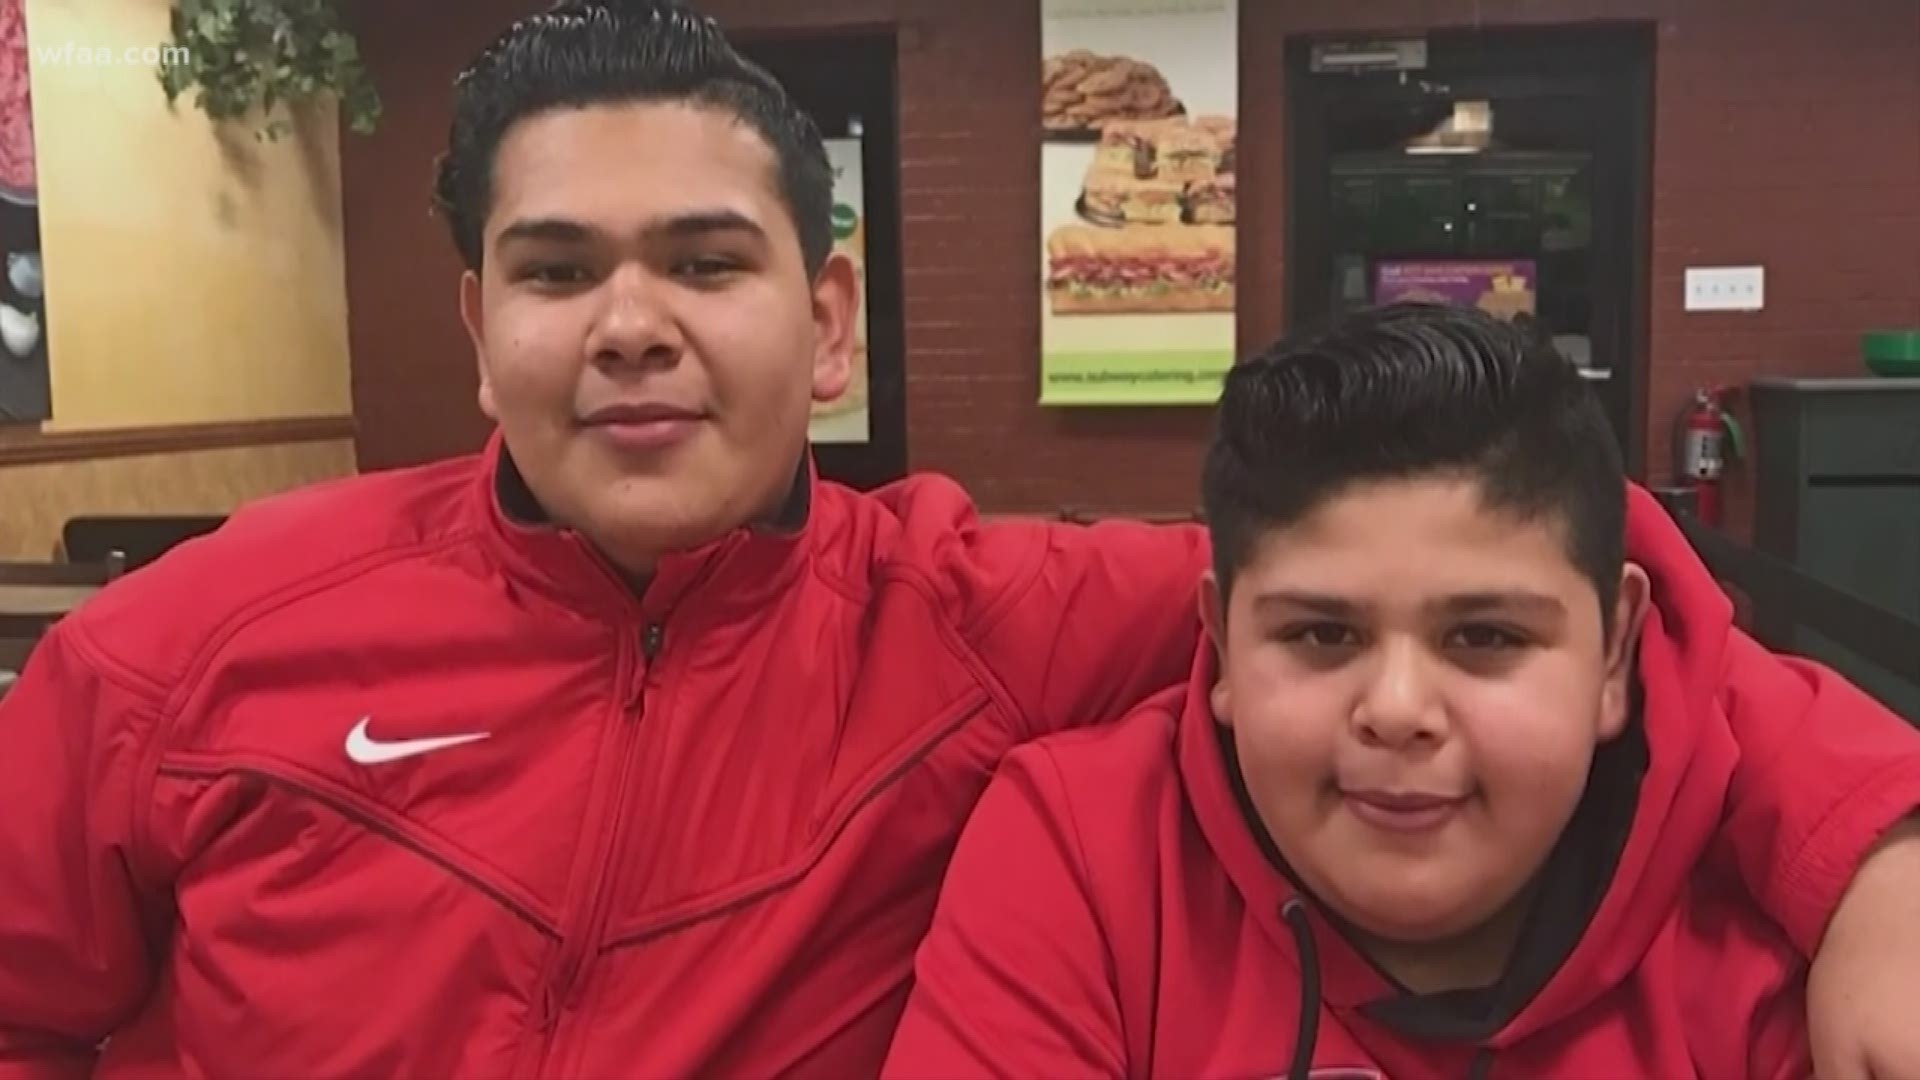 Diego and Daniel River were reported missing on Tuesday night and found dead the following morning.